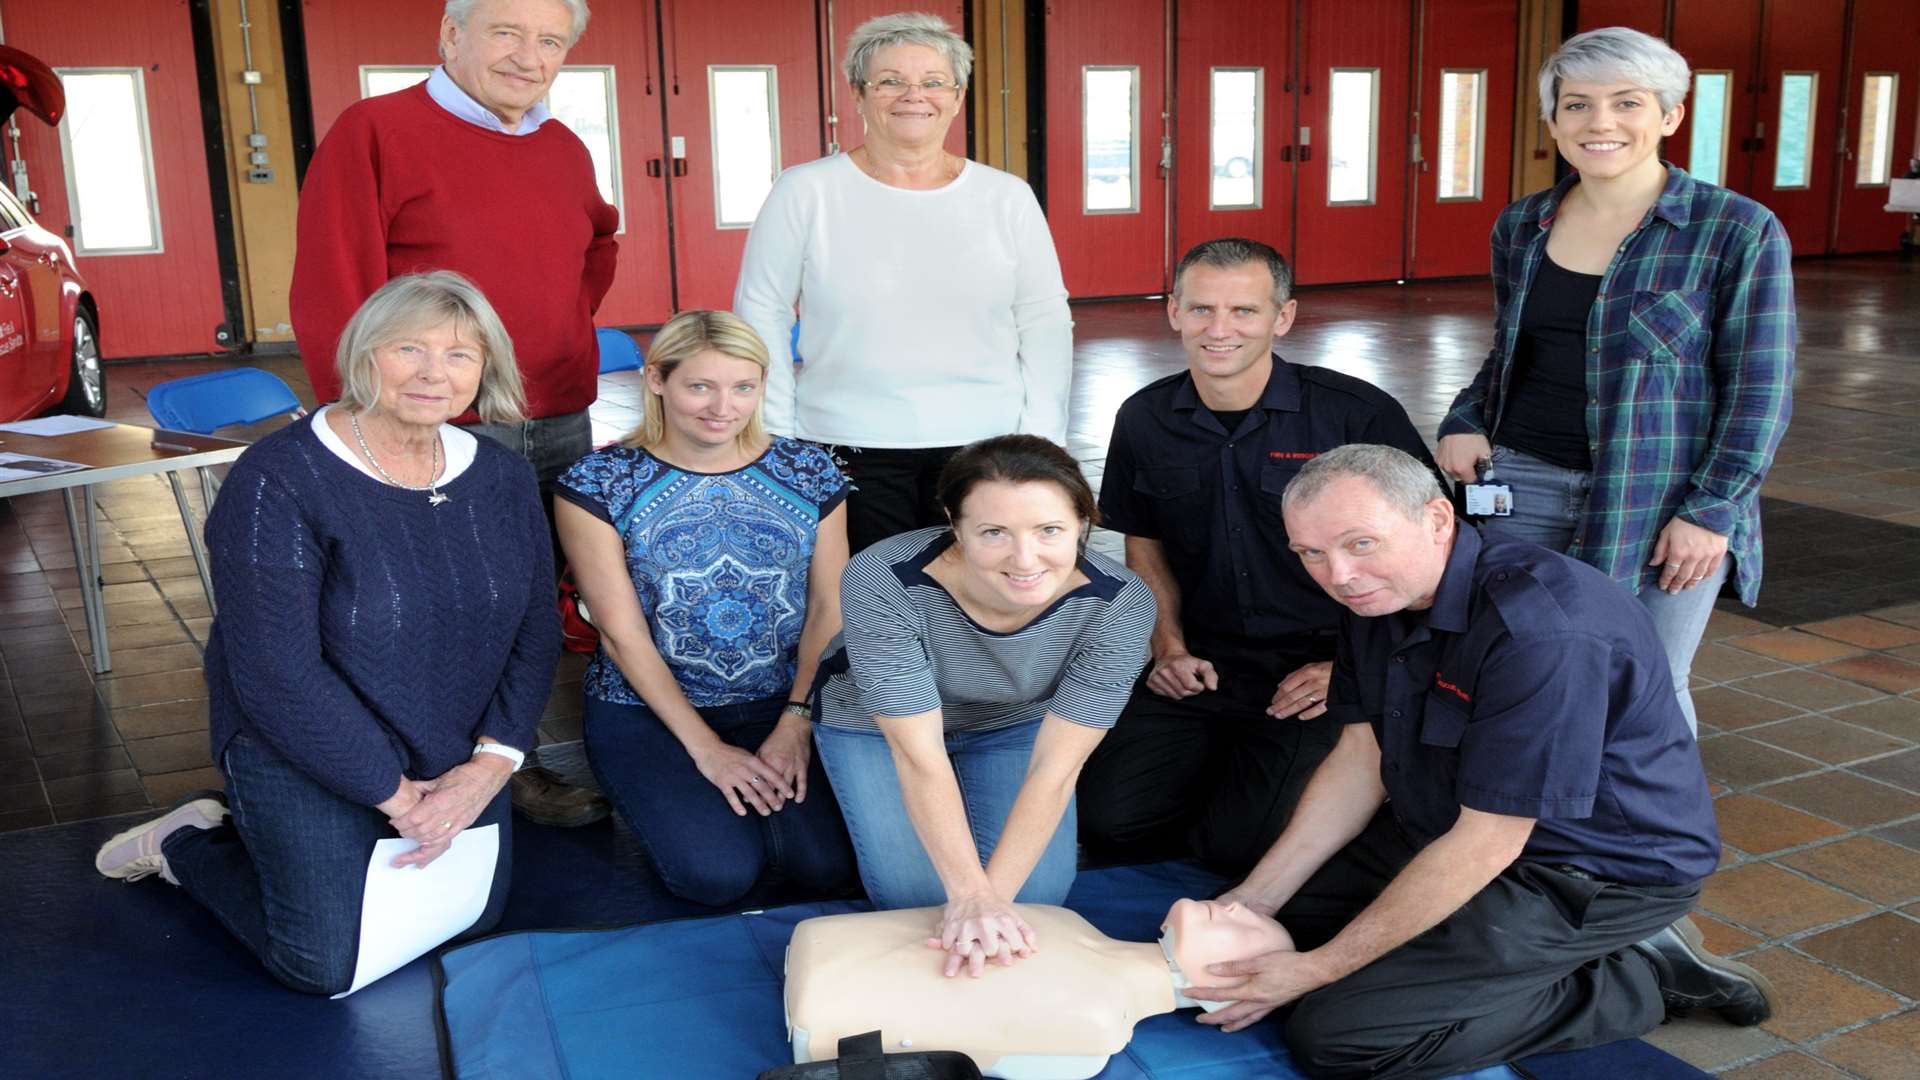 Sue and Alan Burgin, Louise Wells, Wendy Ring, Nicola Shooter, firefighters Kevin Griffith and Ashley Dring and paramedic Zoe Farley during CPR training